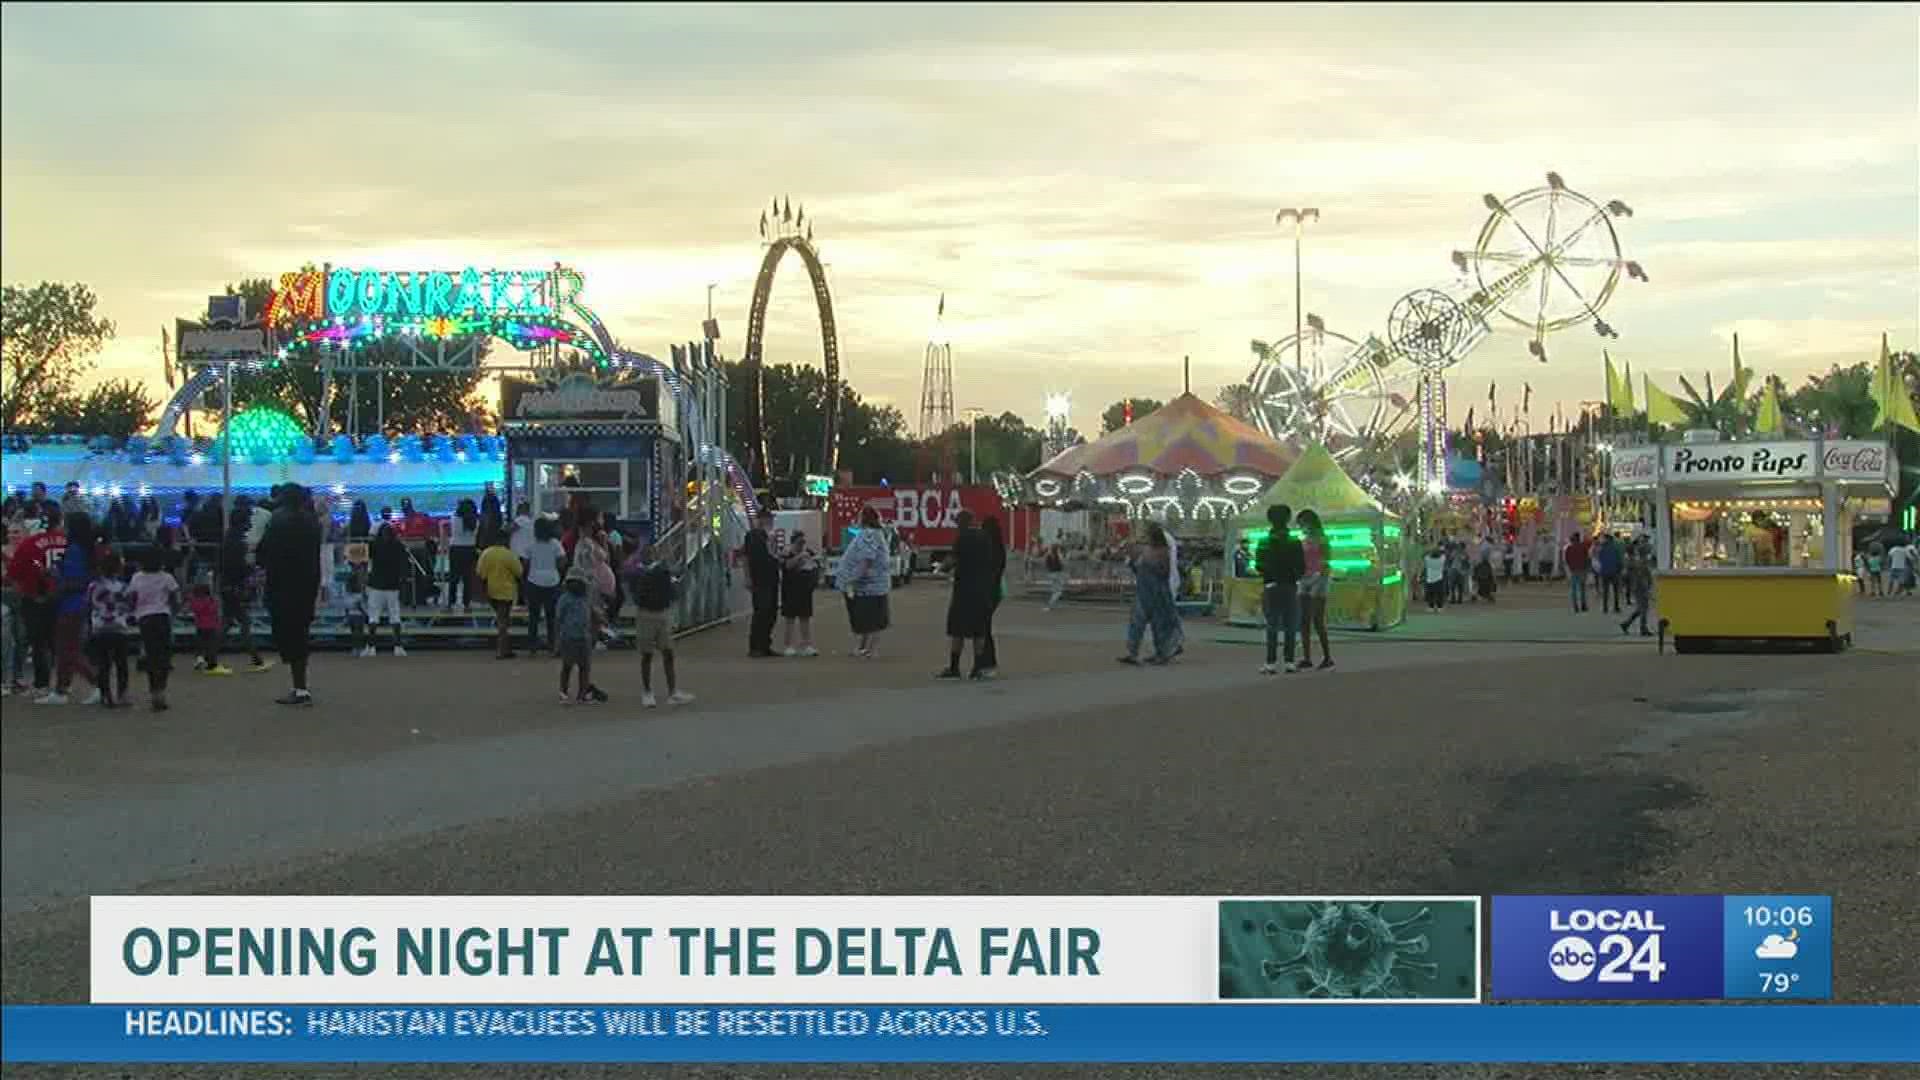 The fair kicked-off today. Meanwhile, the CDC reports Tennessee leads the nation in Covid-19 community transmission.